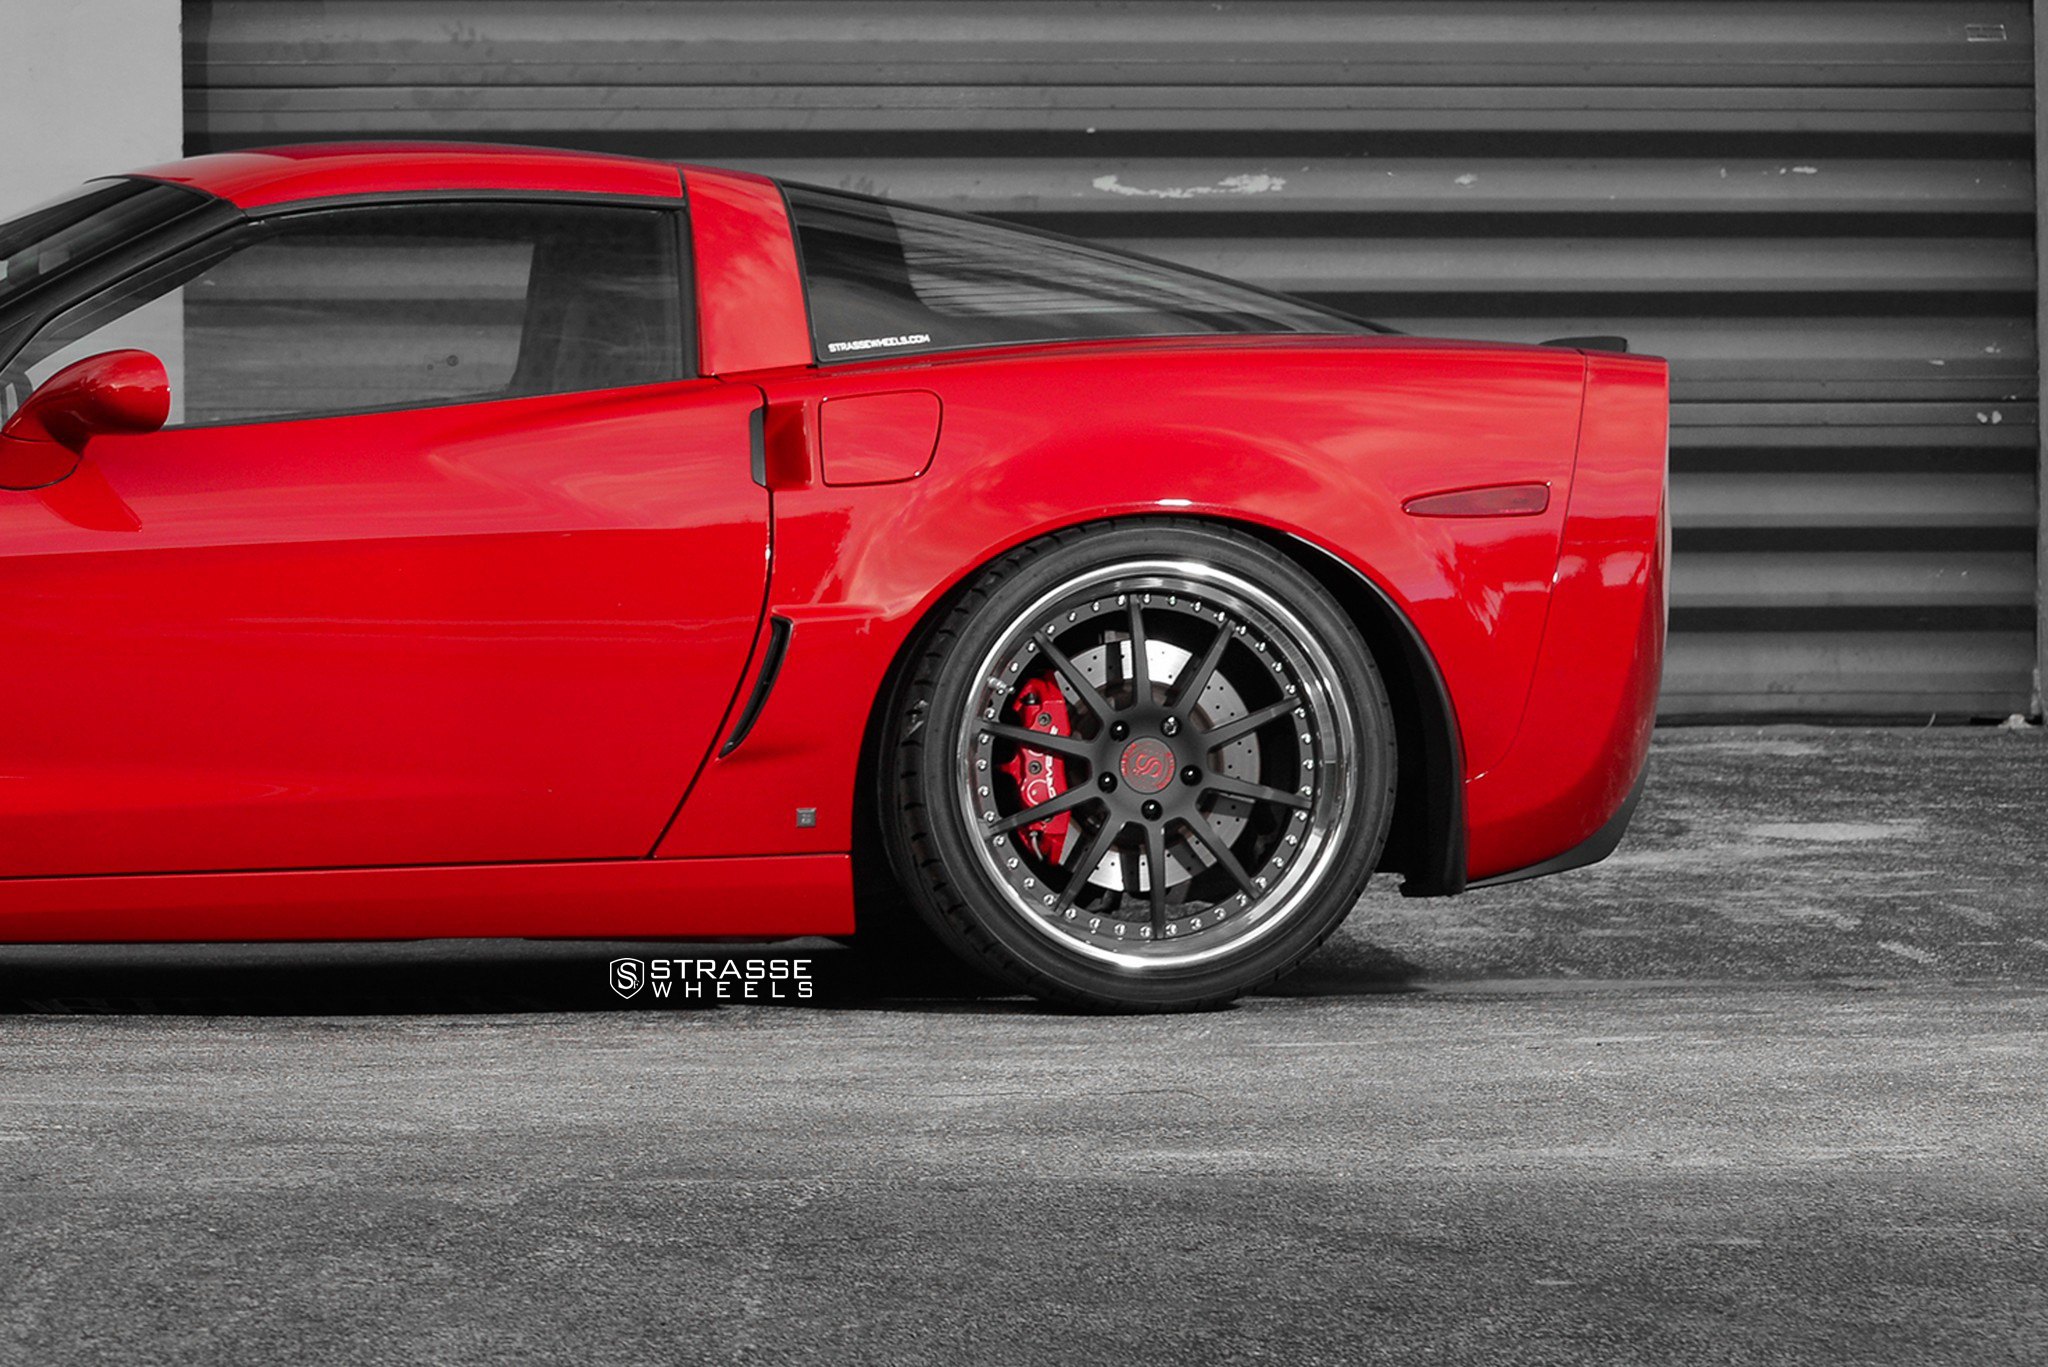 Aftermarket Side Scoops on Red Chevy Corvette - Photo by Strasse Forged